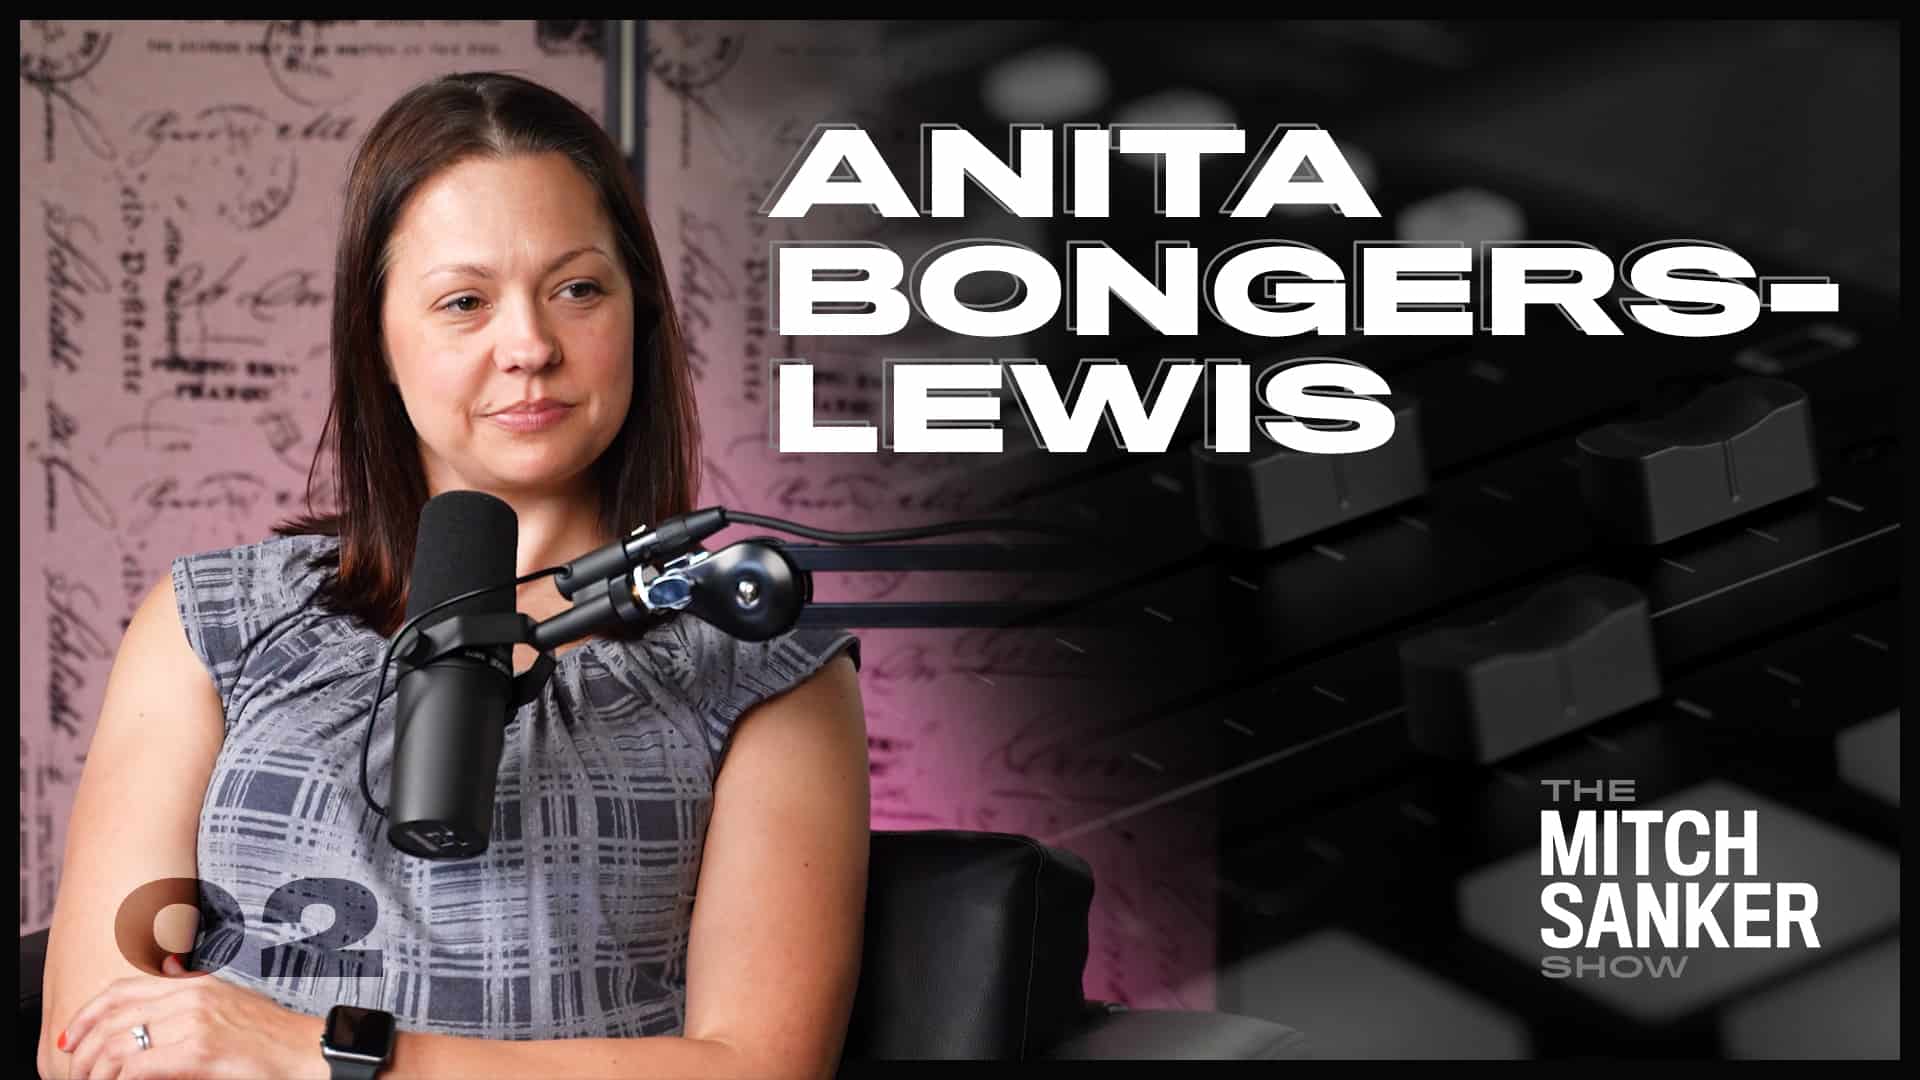 You are currently viewing The Mitch Sanker Show – Episode 03 featuring Anita Bongers-Lewis